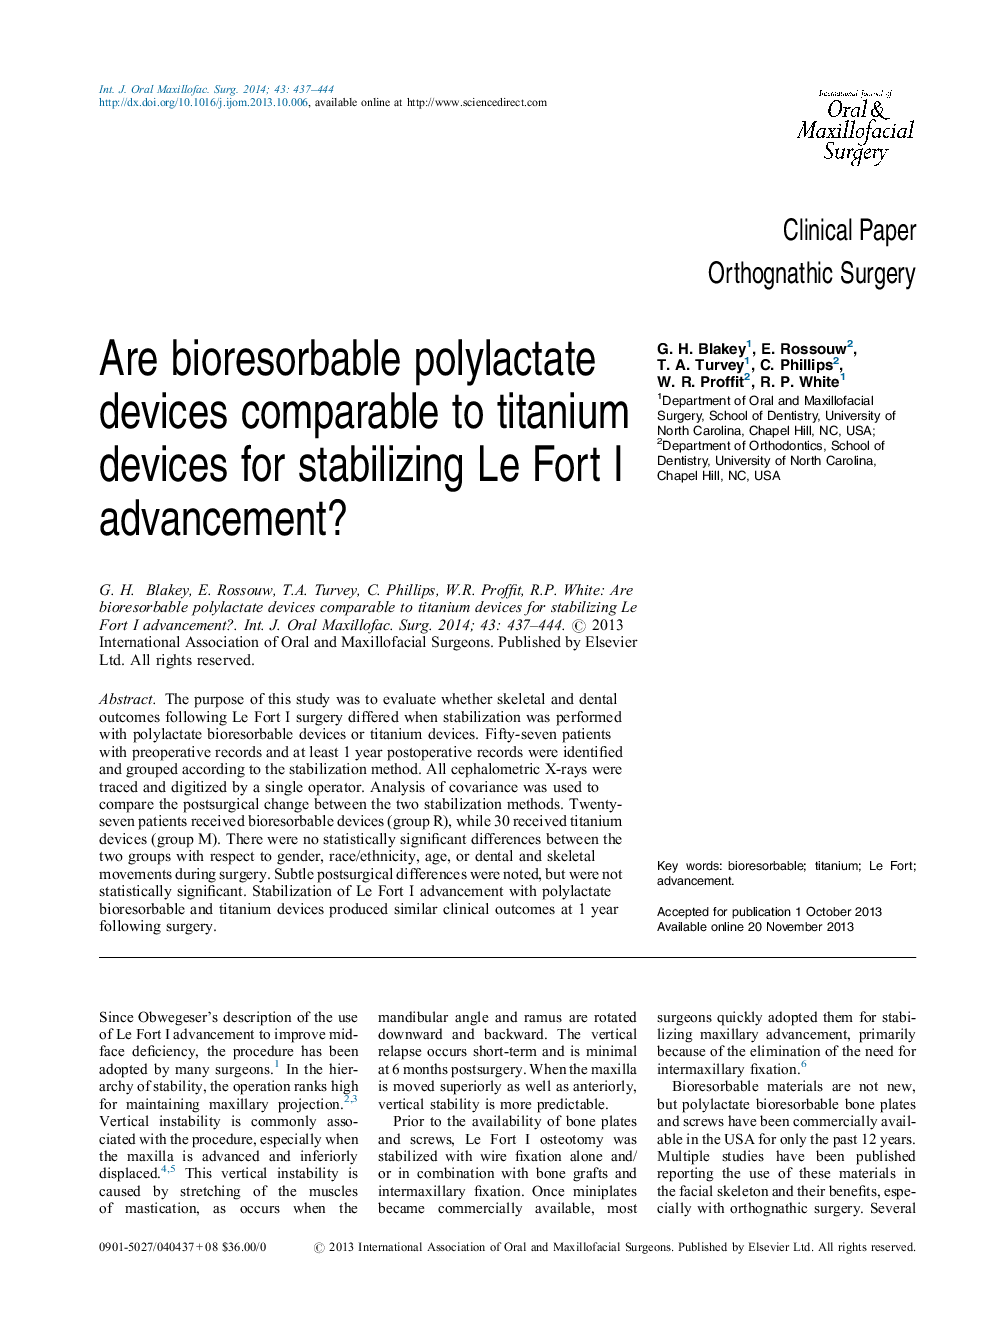 Are bioresorbable polylactate devices comparable to titanium devices for stabilizing Le Fort I advancement?